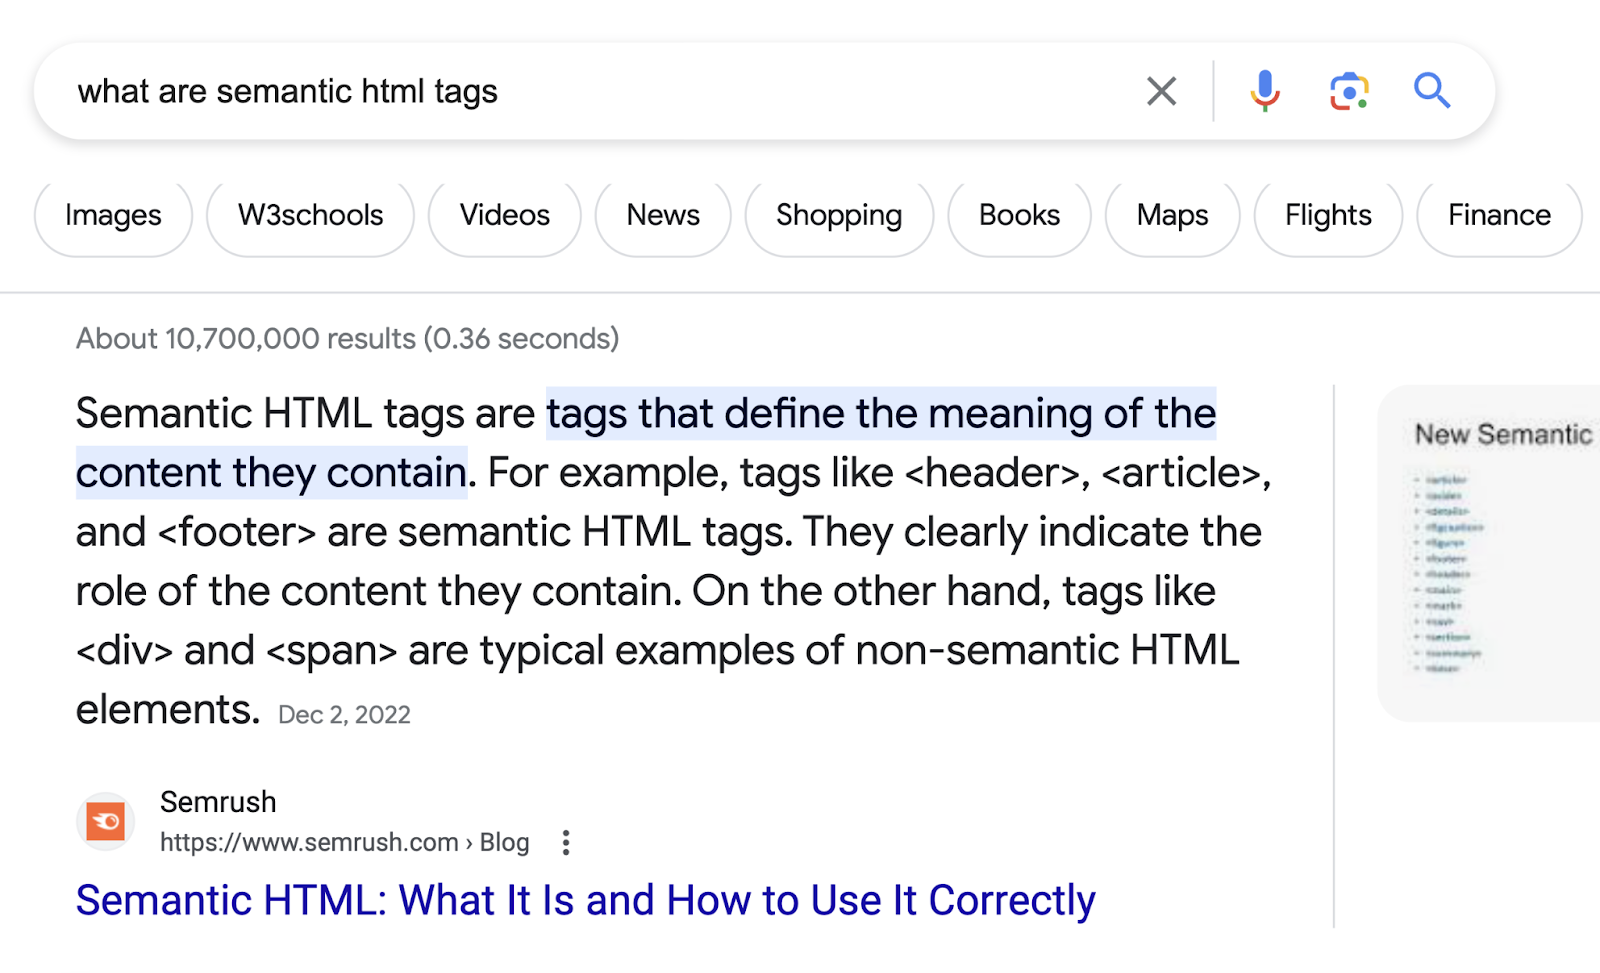 Semrush's semantic HTML guide ranks as the featured snippet for "what are semantic html tags" query